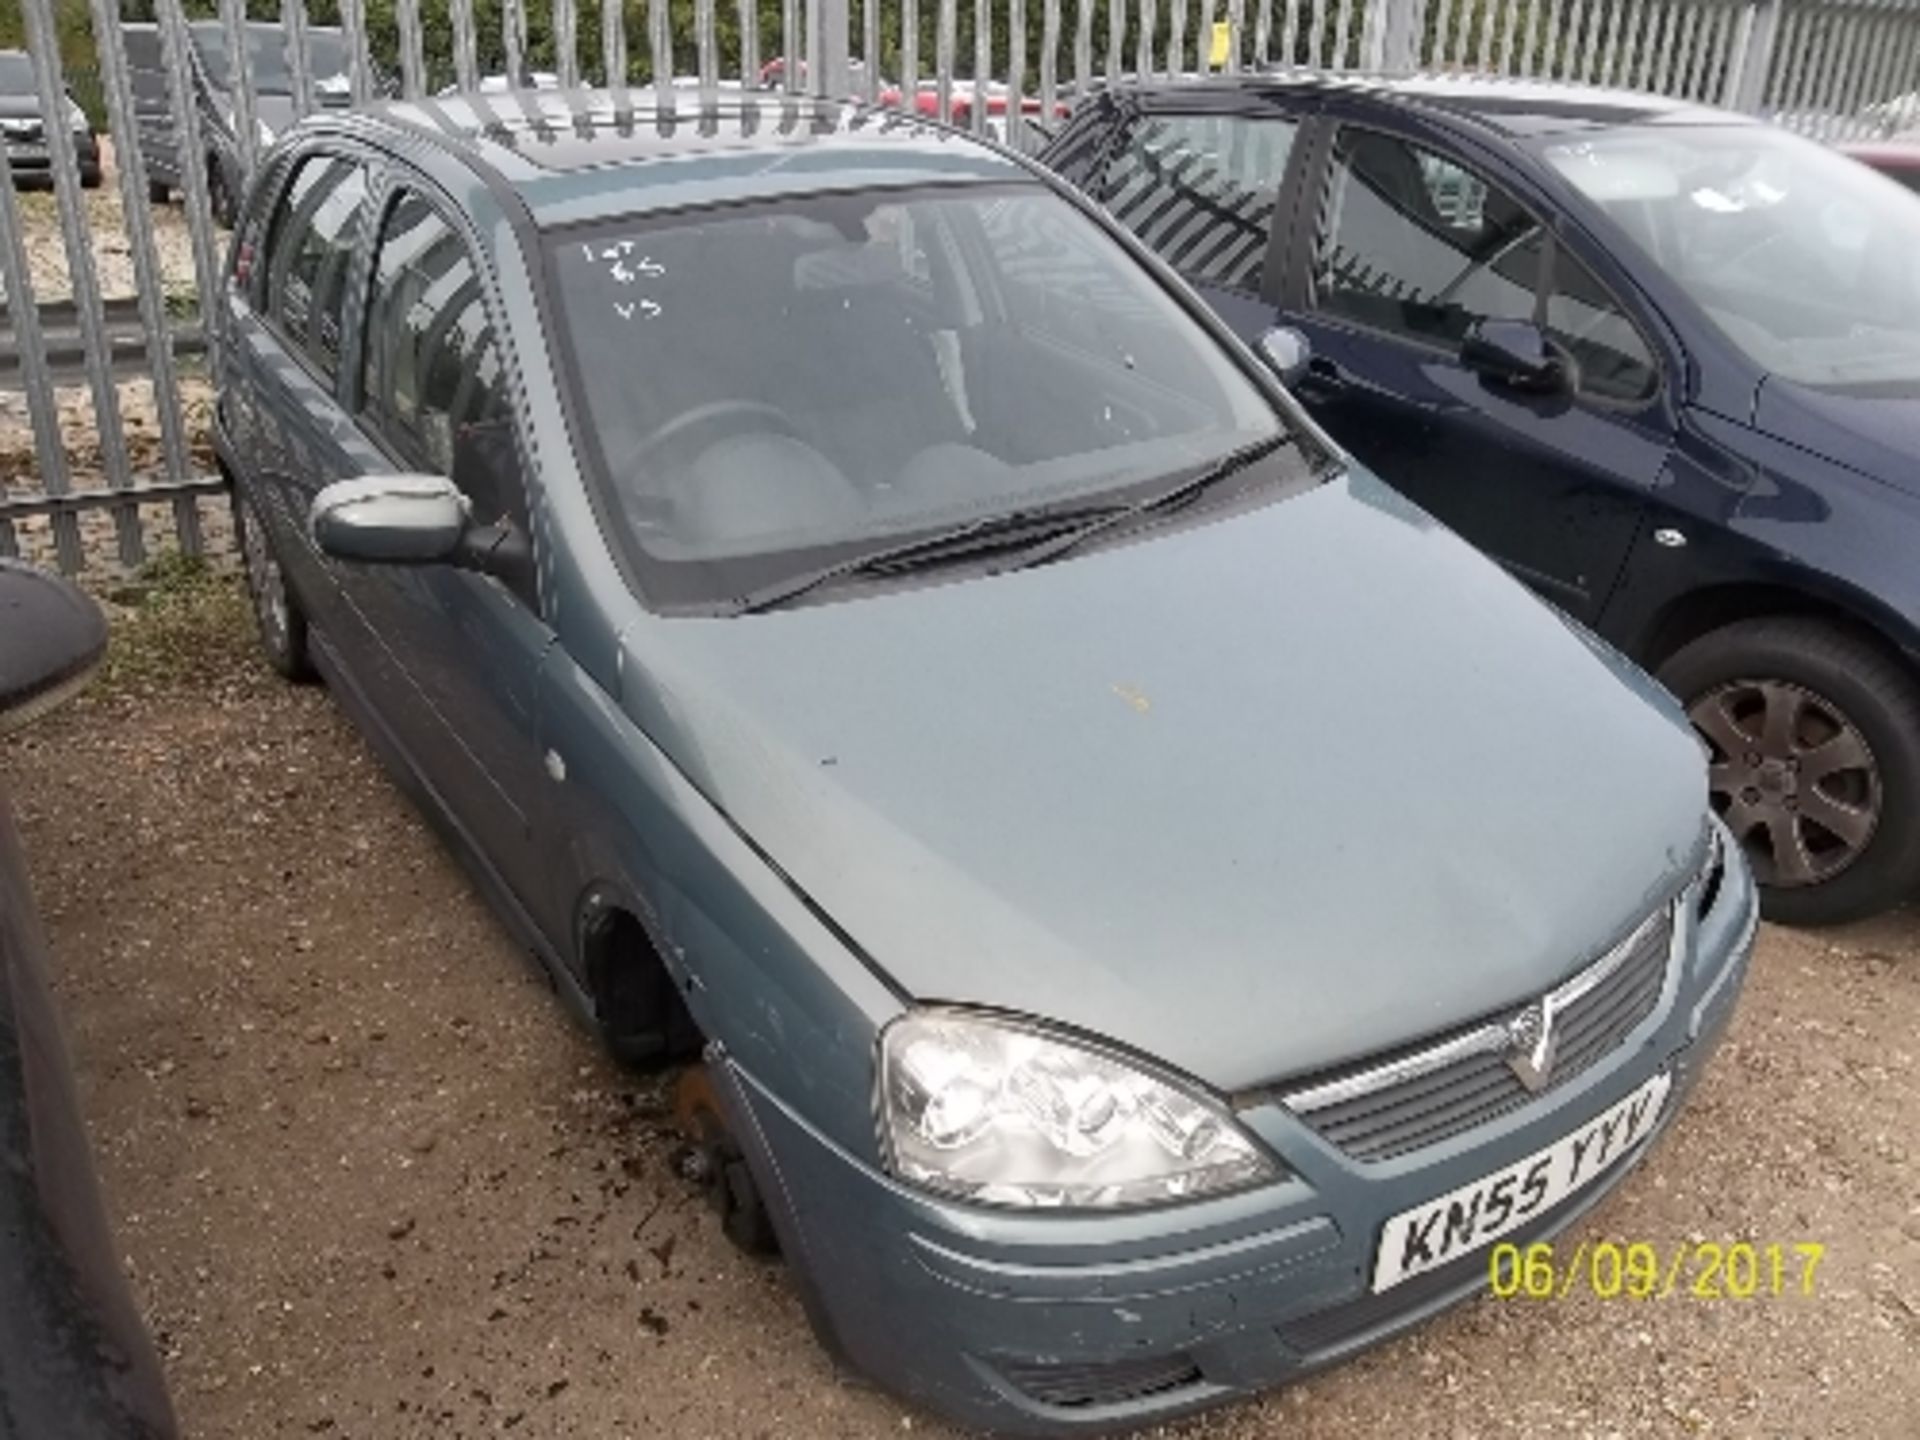 Vauxhall Corsa Design 16V Twinport - KN55 YYV Date of registration: 25.11.2005 1364cc, petrol, - Image 2 of 4